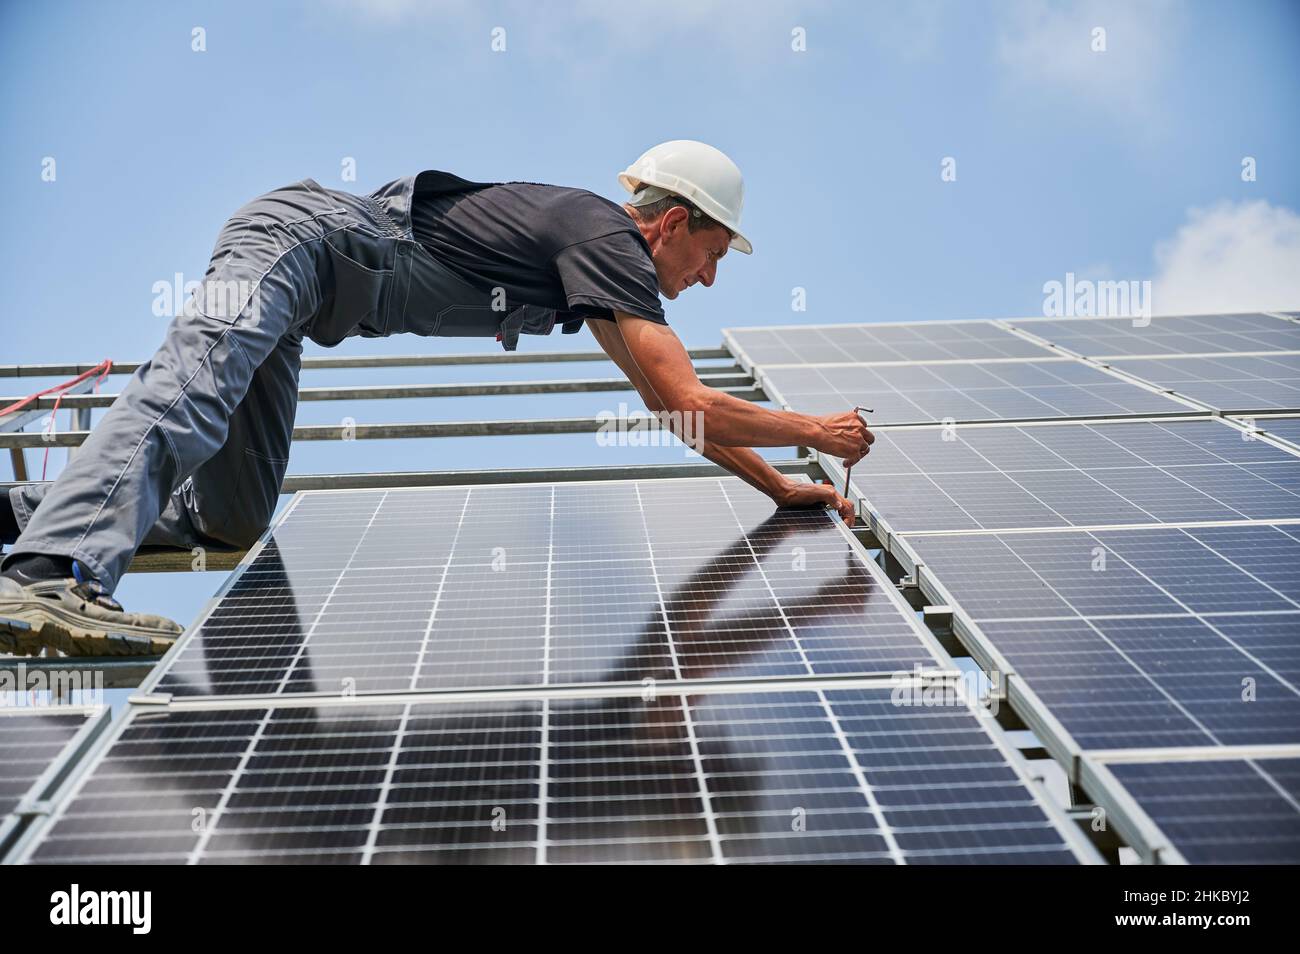 Worker mounting photovoltaic solar panel system outdoors. Man engineer placing solar module on metal rails, wearing construction helmets and work gloves. Renewable and ecological energy. Stock Photo